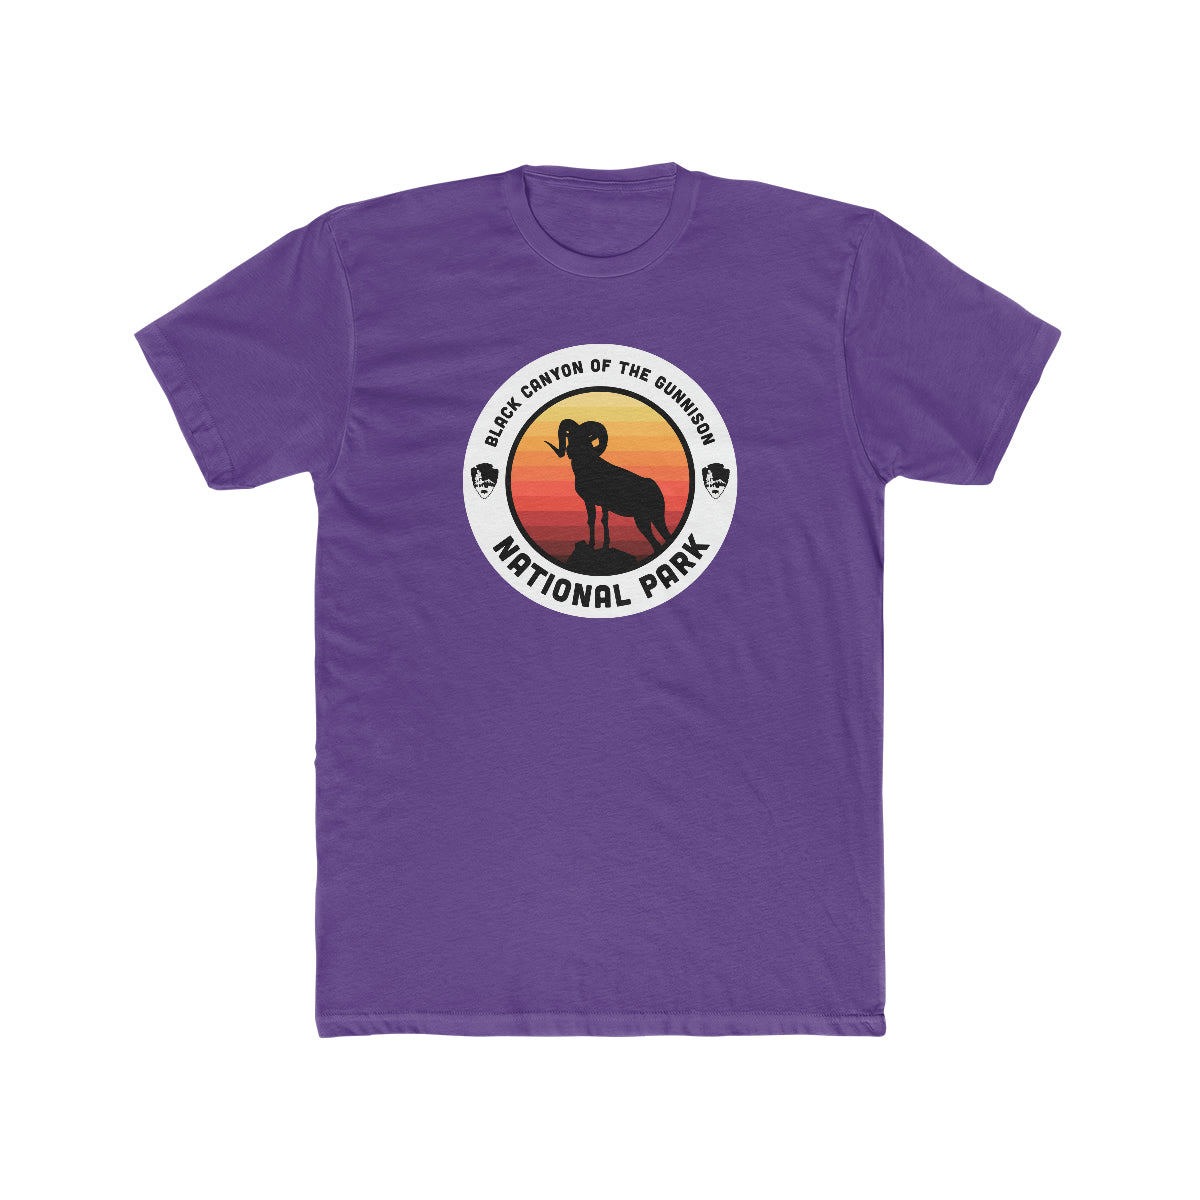 Black Canyon of the Gunnison National Park T-Shirt - Round Badge Design